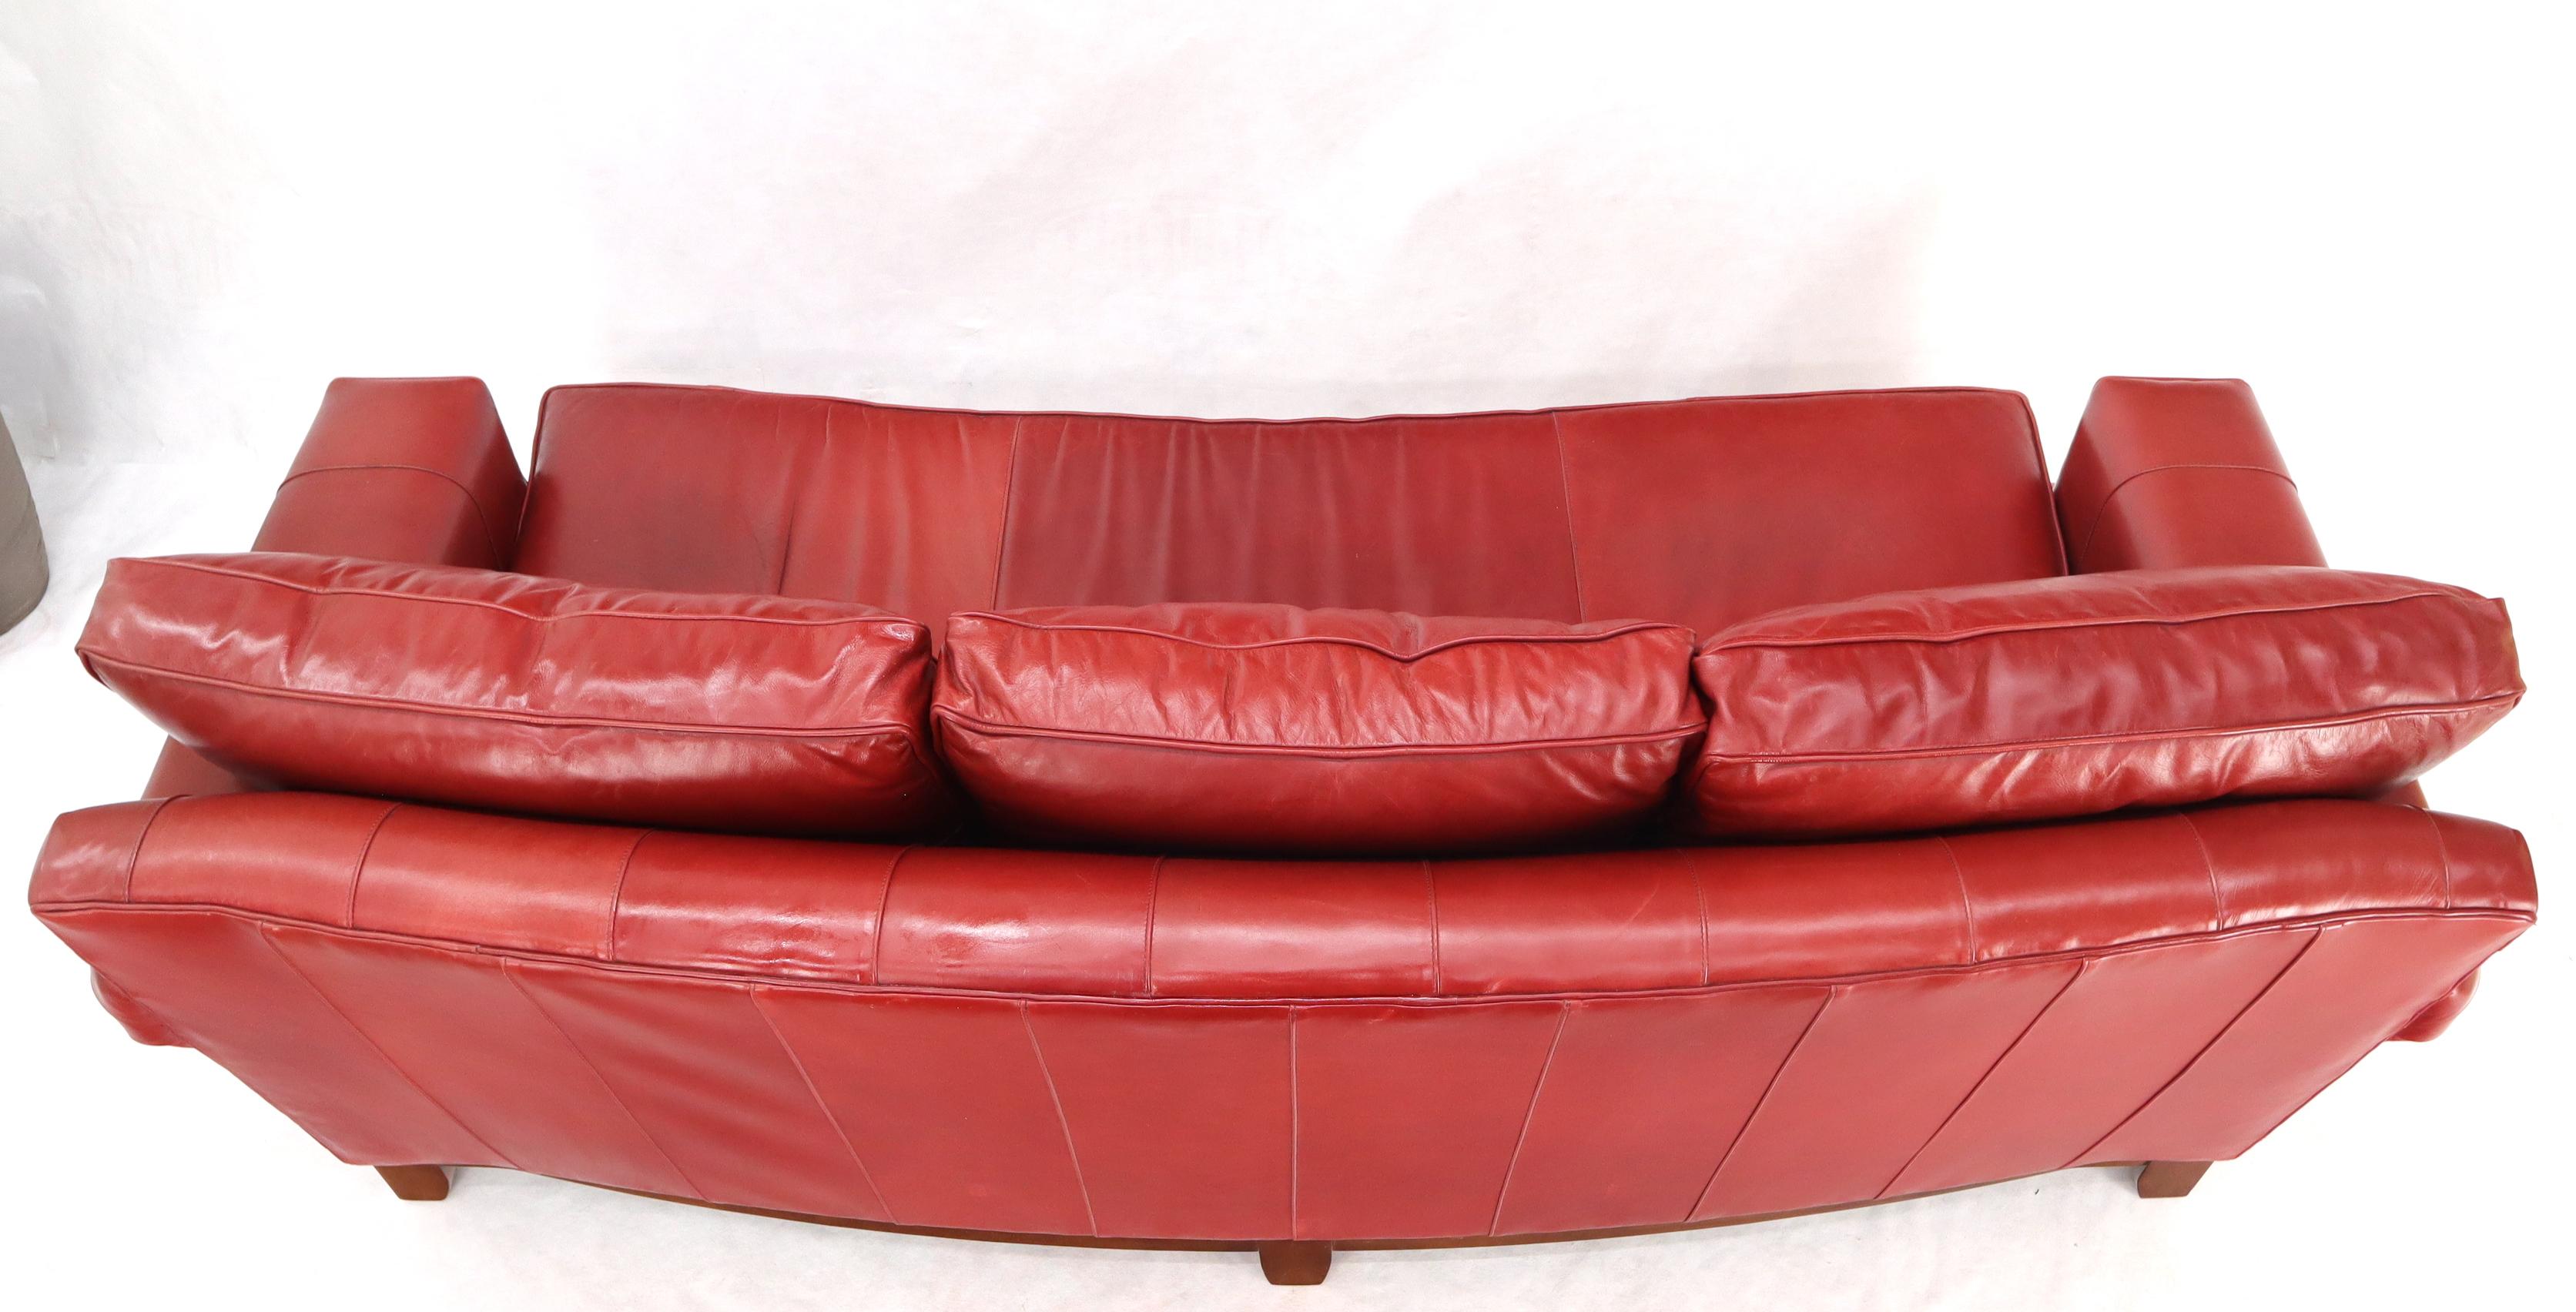 Concave Front Edge Tomato Red Leather Upholstery Couch Leather Sofa Thomasville 4